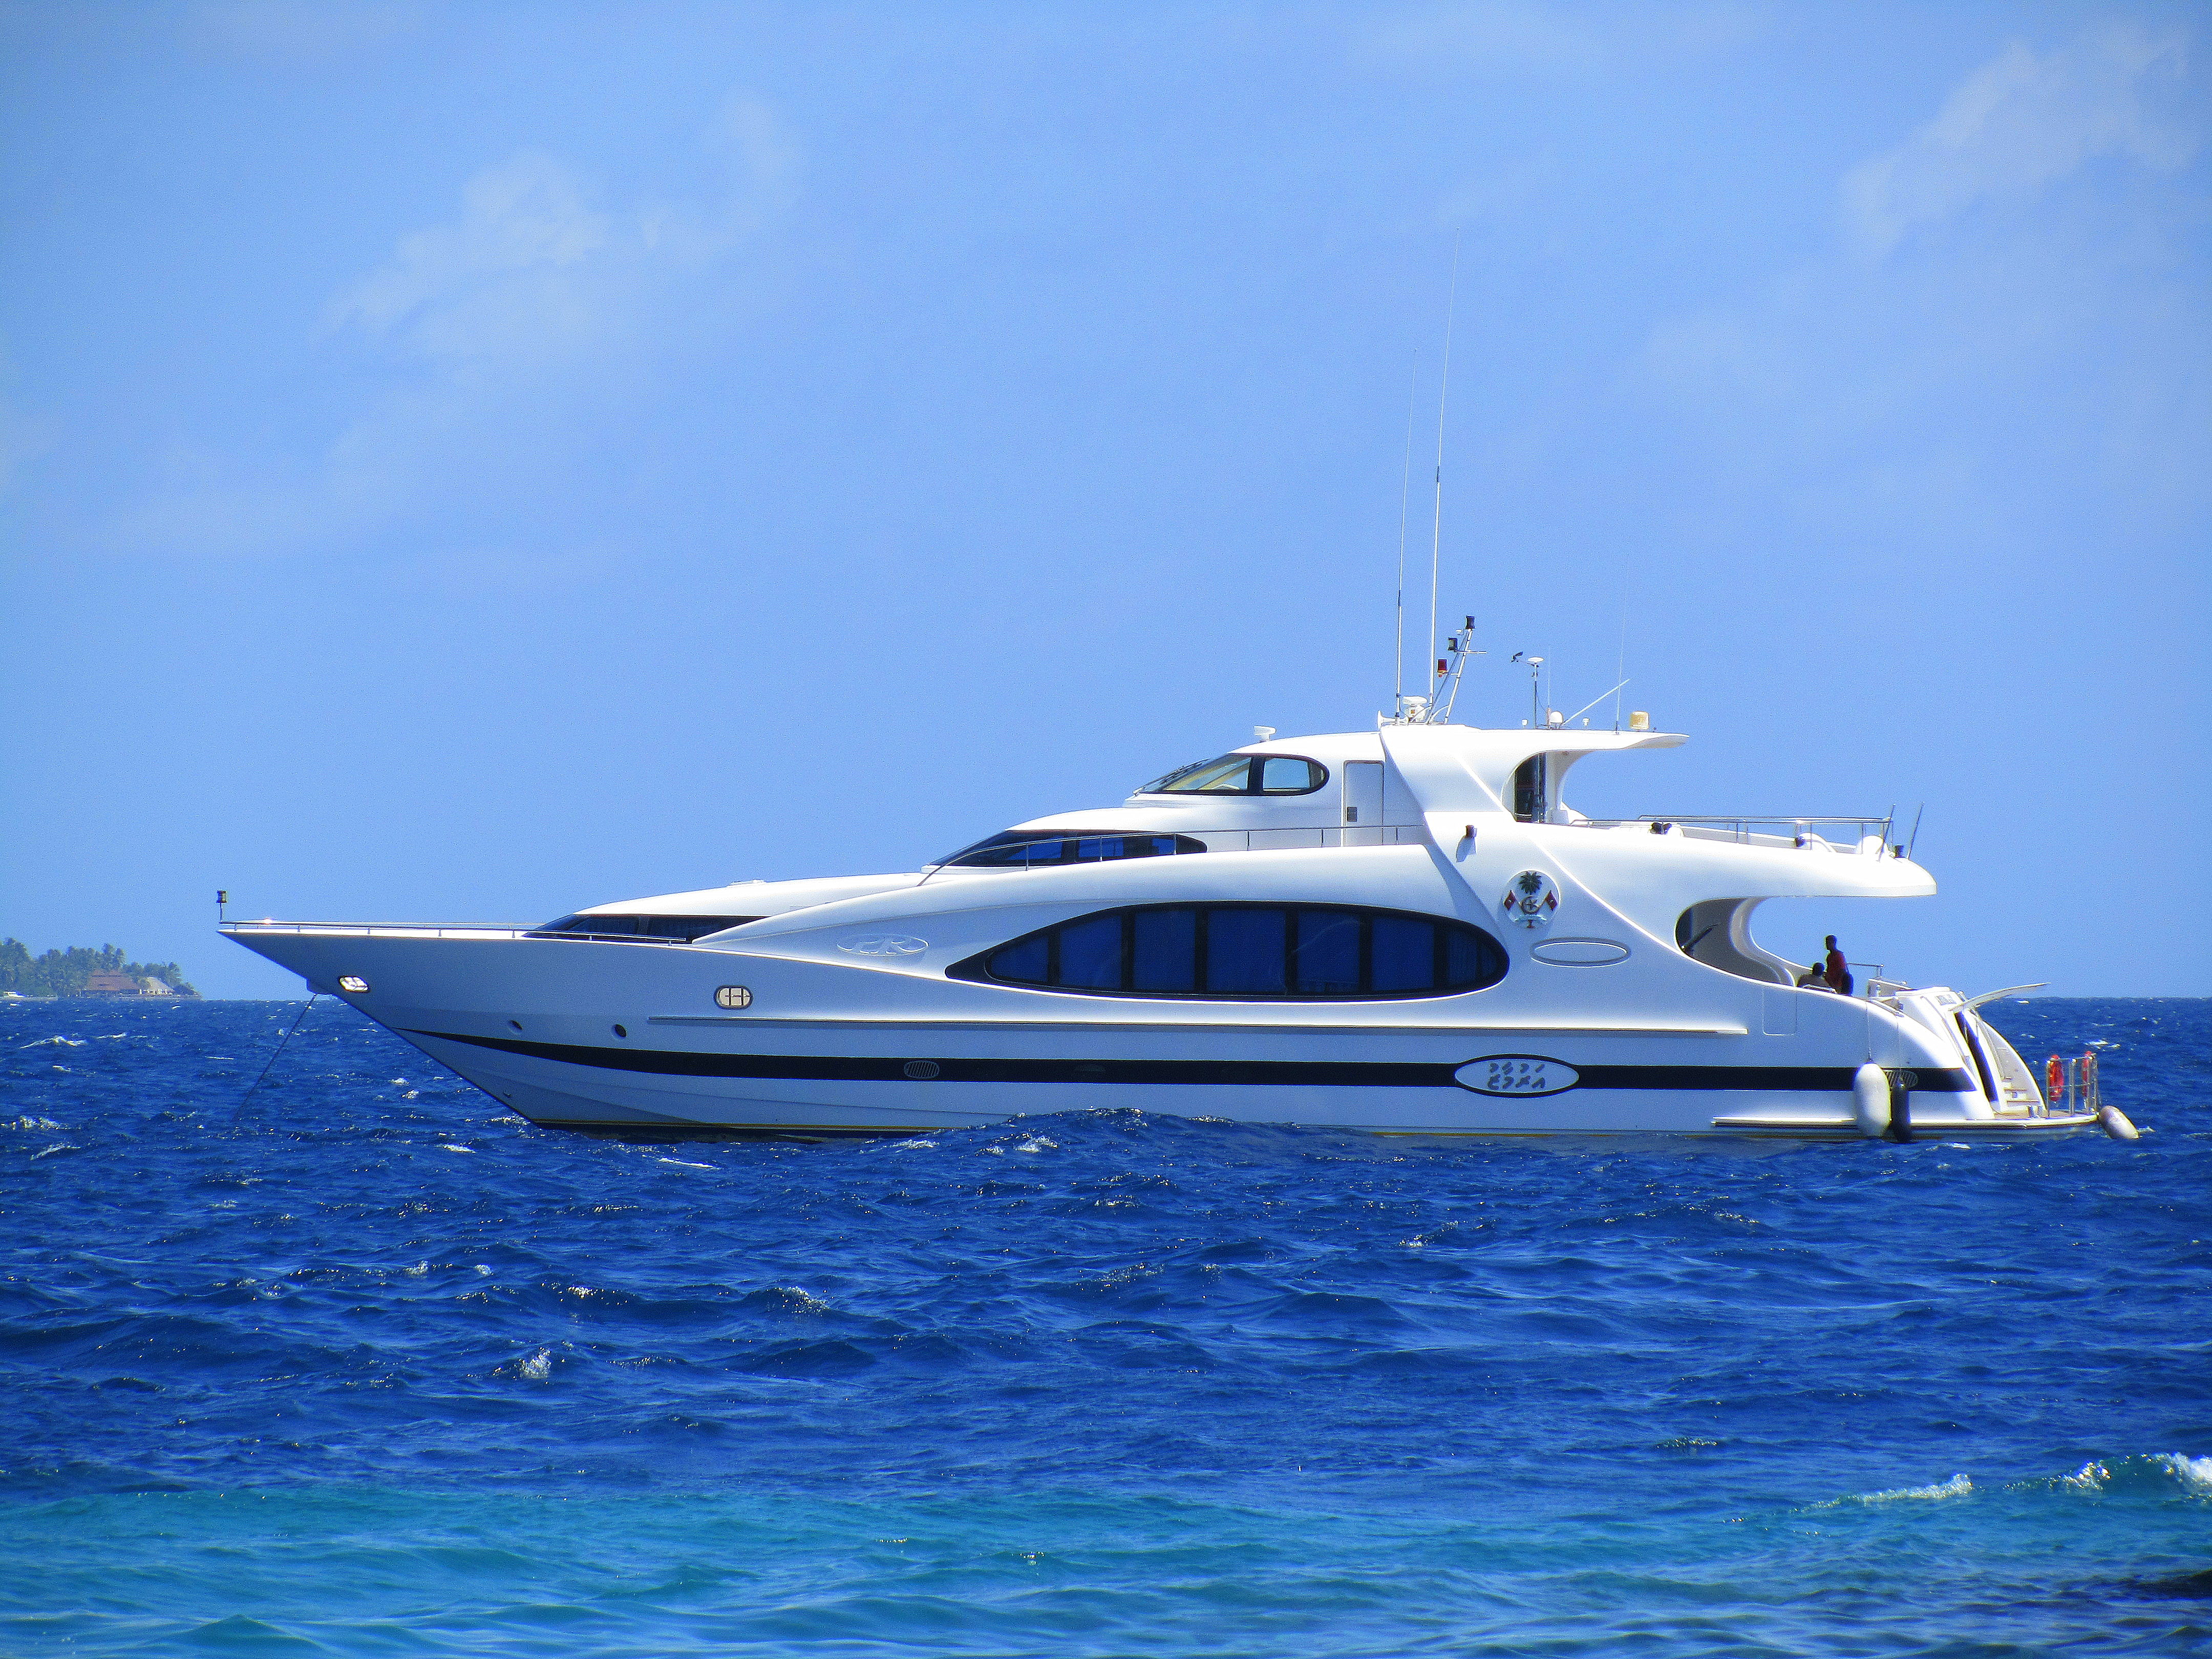 Choosing the Right Charter Company: How to Find Discreet Yacht Rentals